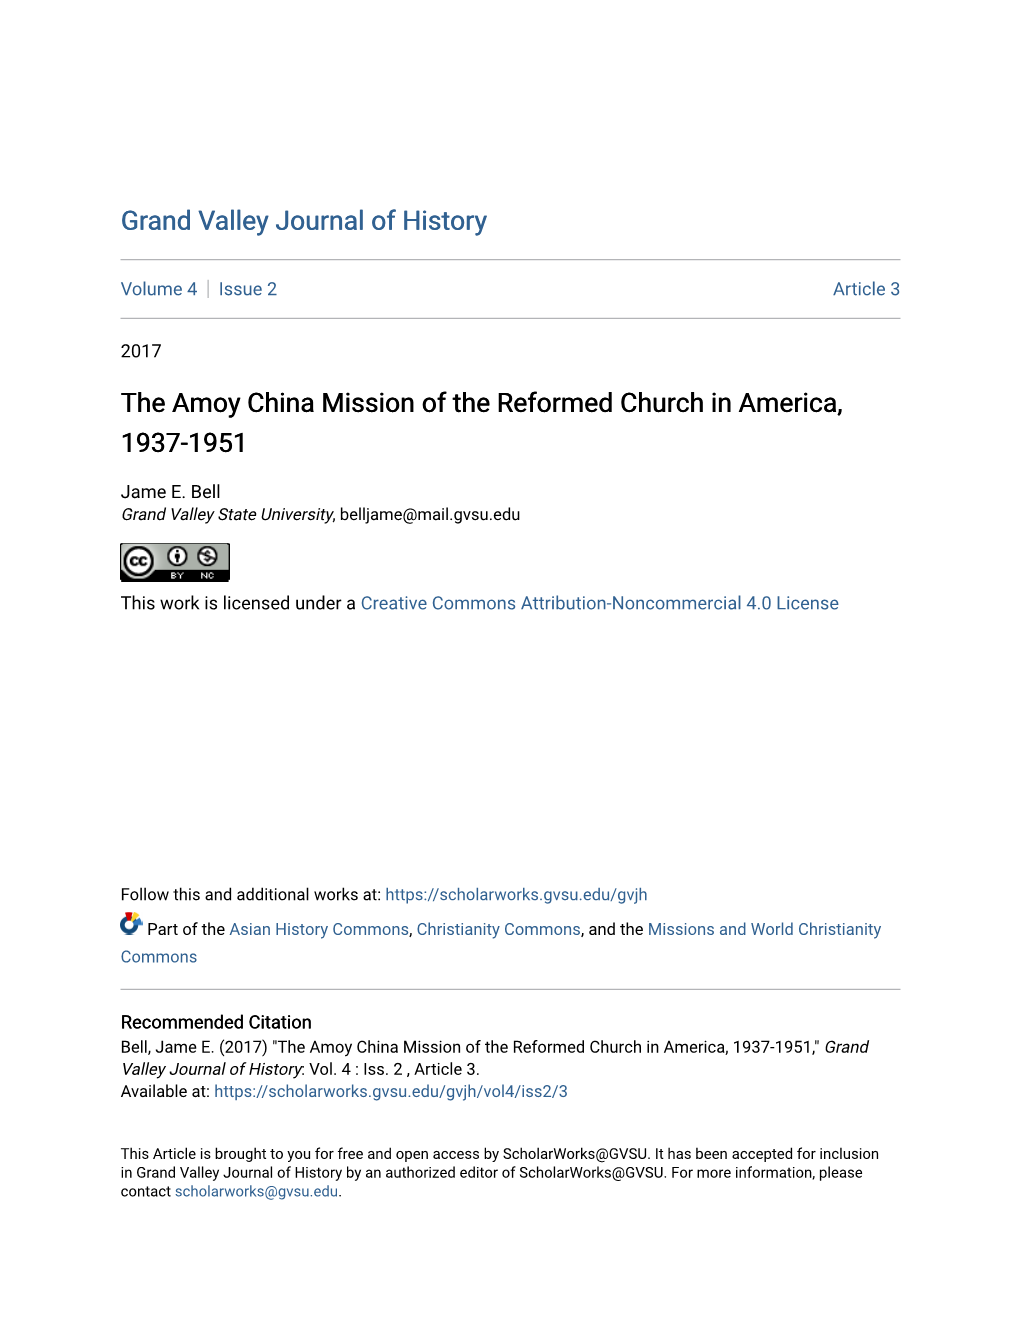 The Amoy China Mission of the Reformed Church in America, 1937-1951